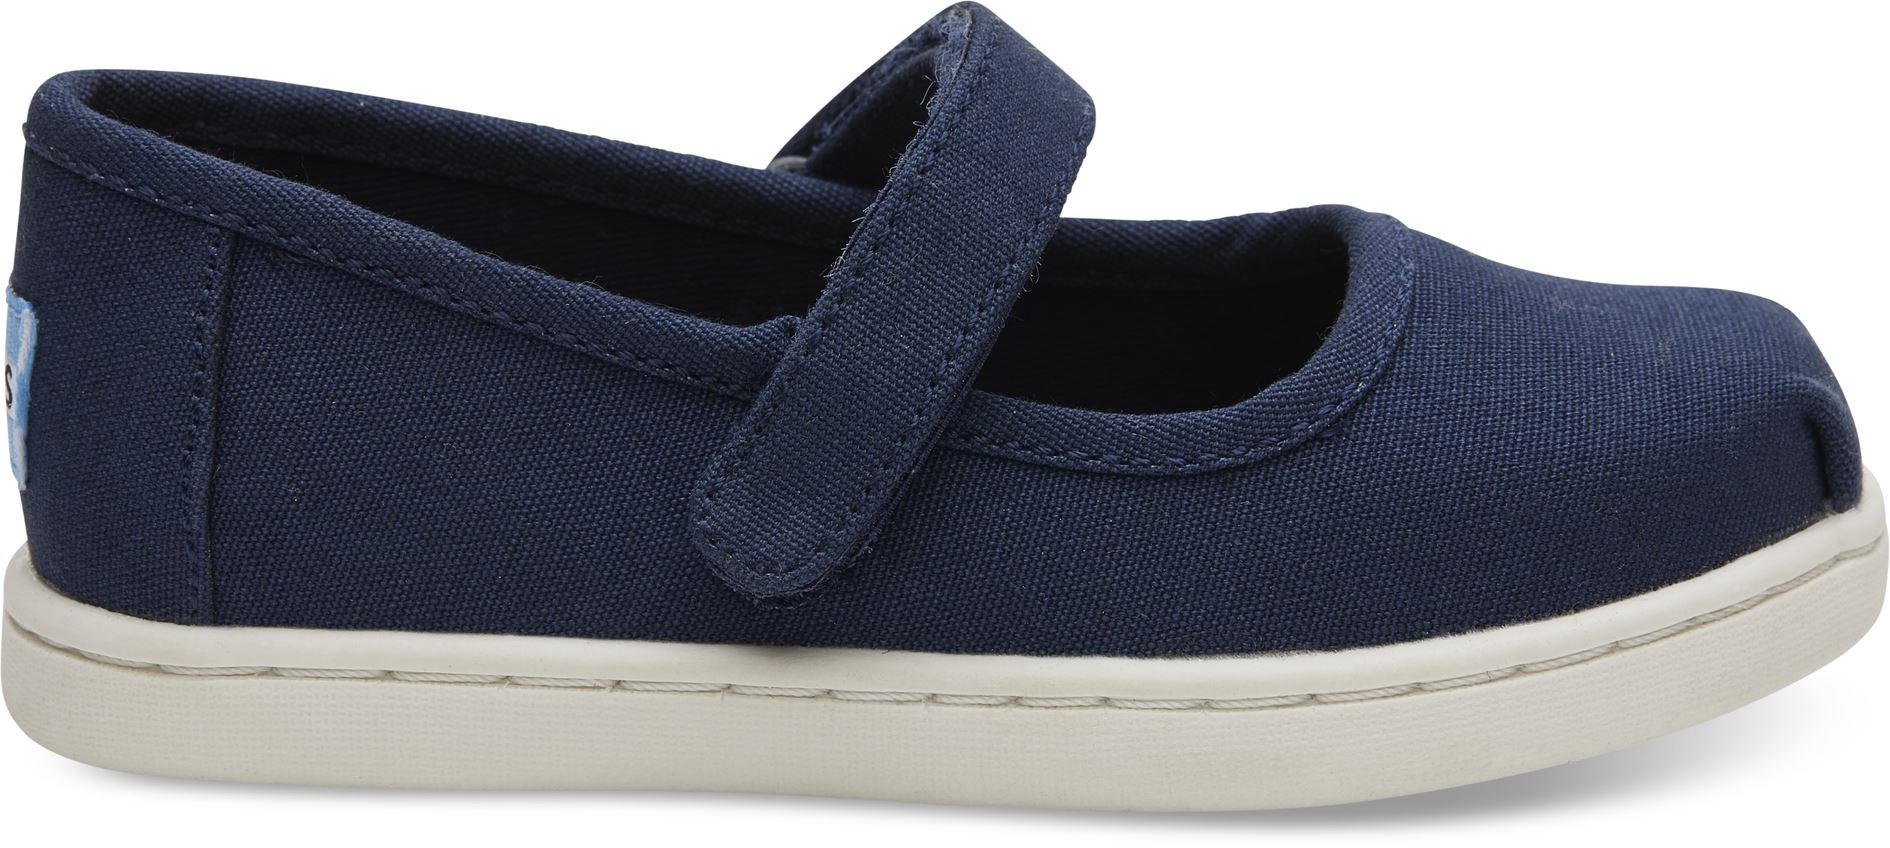 A girls canvas shoe by TOMS, style Mary Jane, in navy denim with a velcro strap. Right side view.